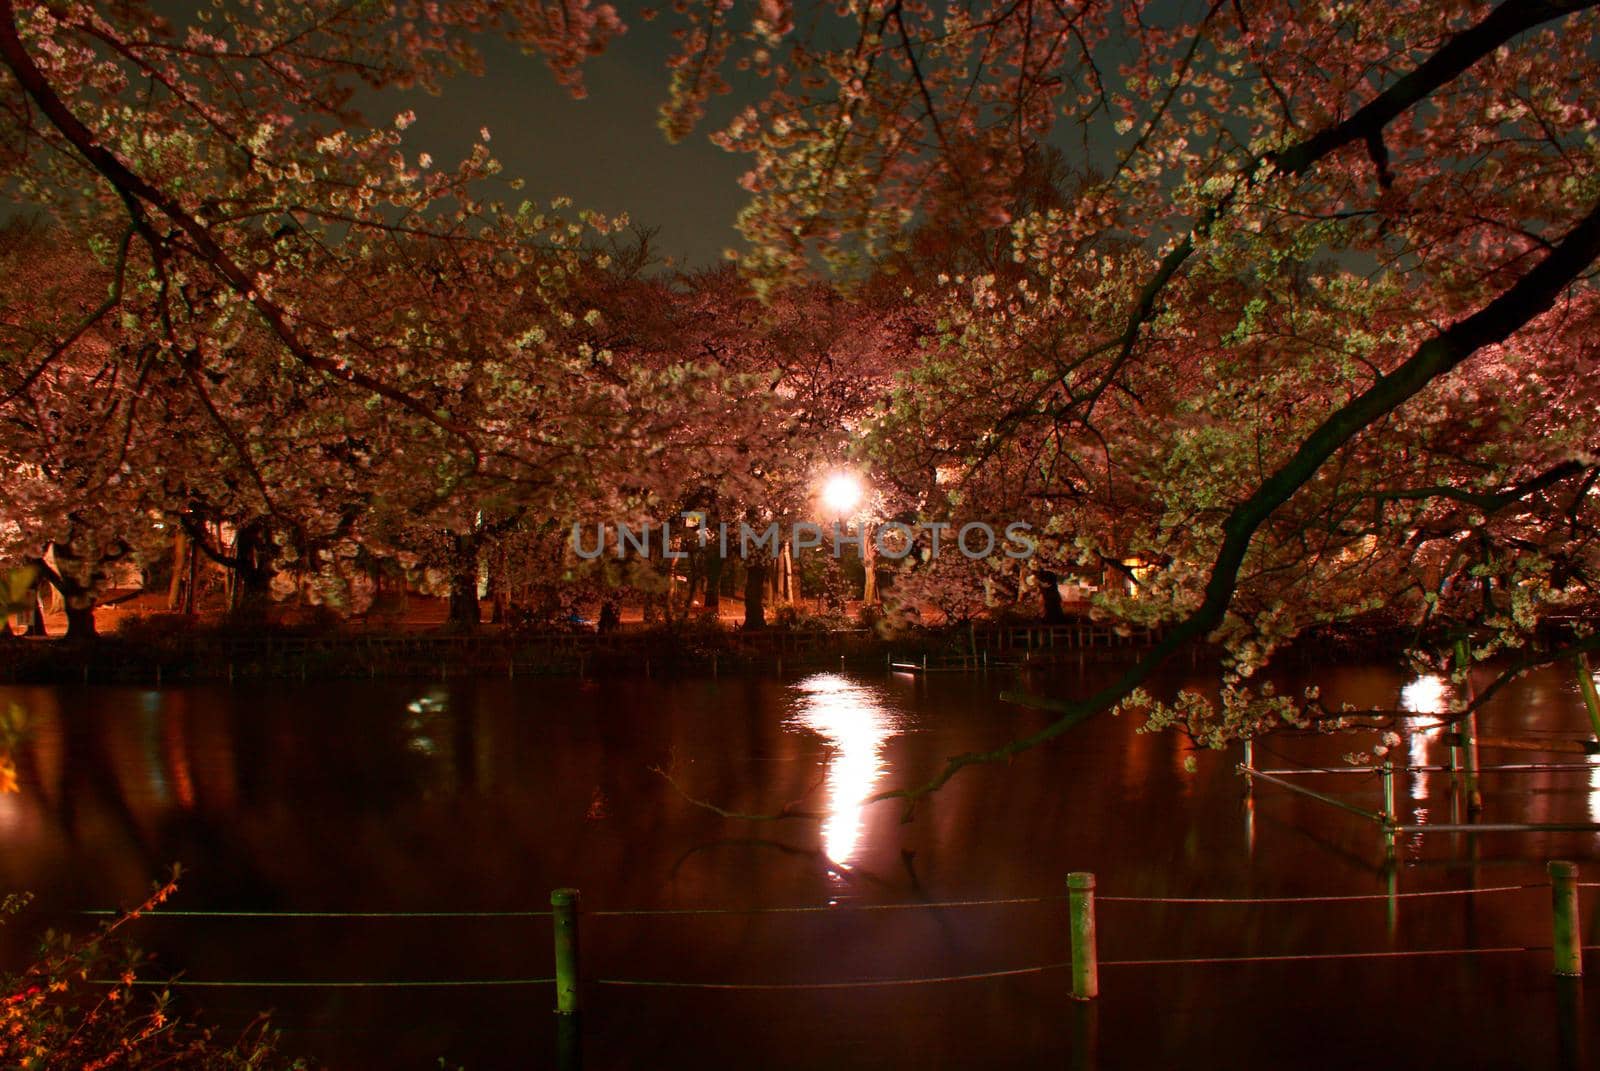 Image of the night cherry blossoms. Shooting Location: Tokyo Chofu City